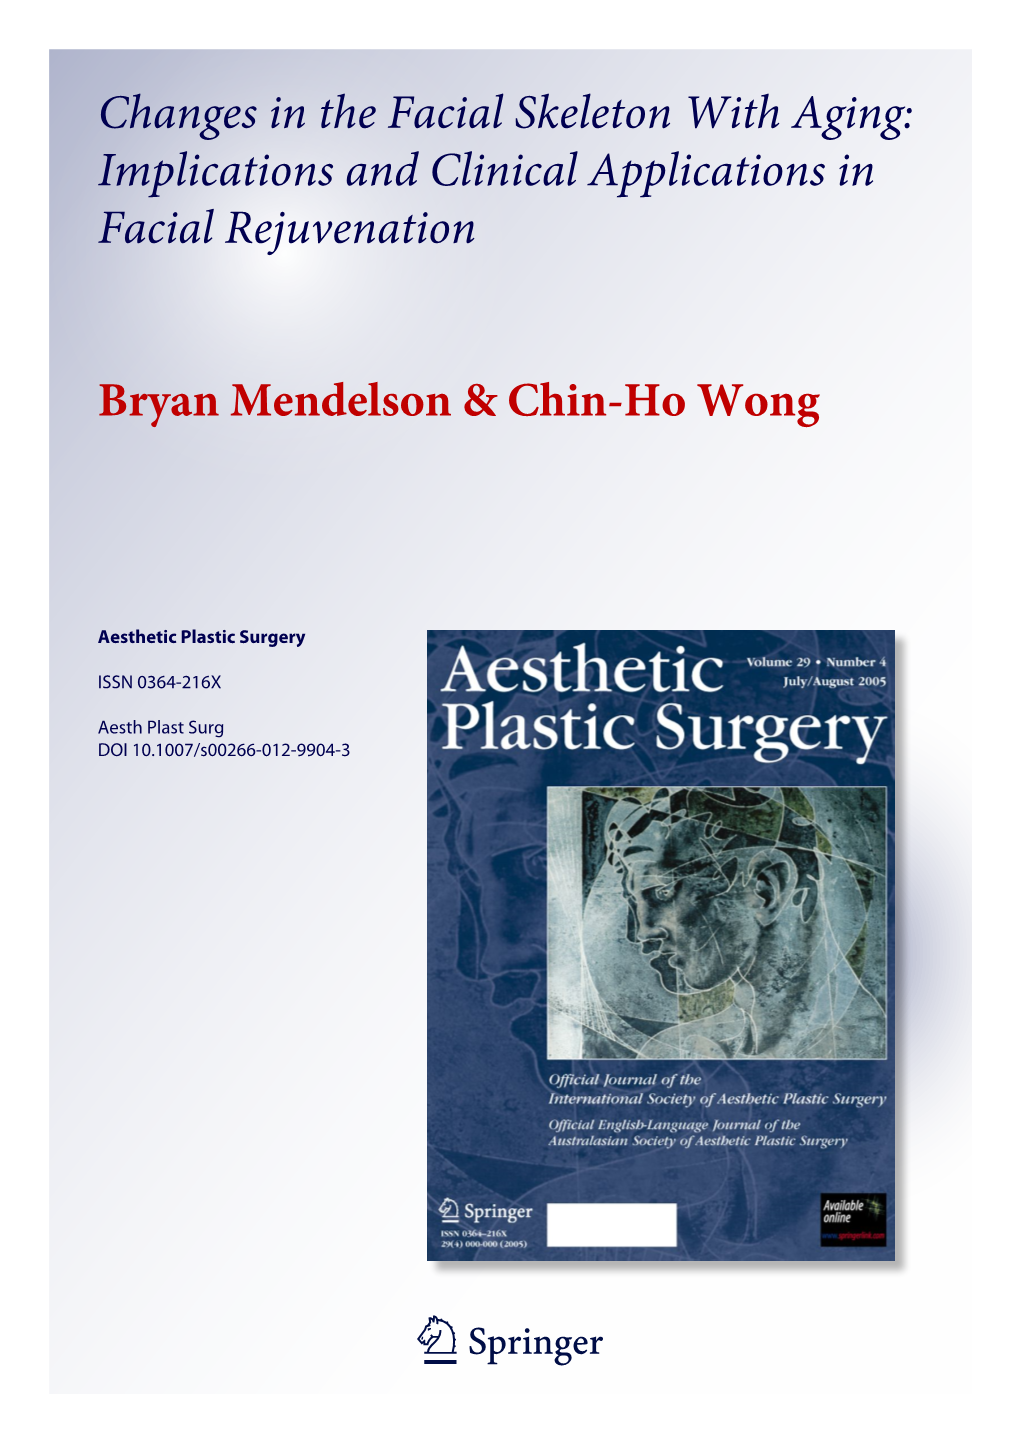 Changes in the Facial Skeleton with Aging: Implications and Clinical Applications in Facial Rejuvenation